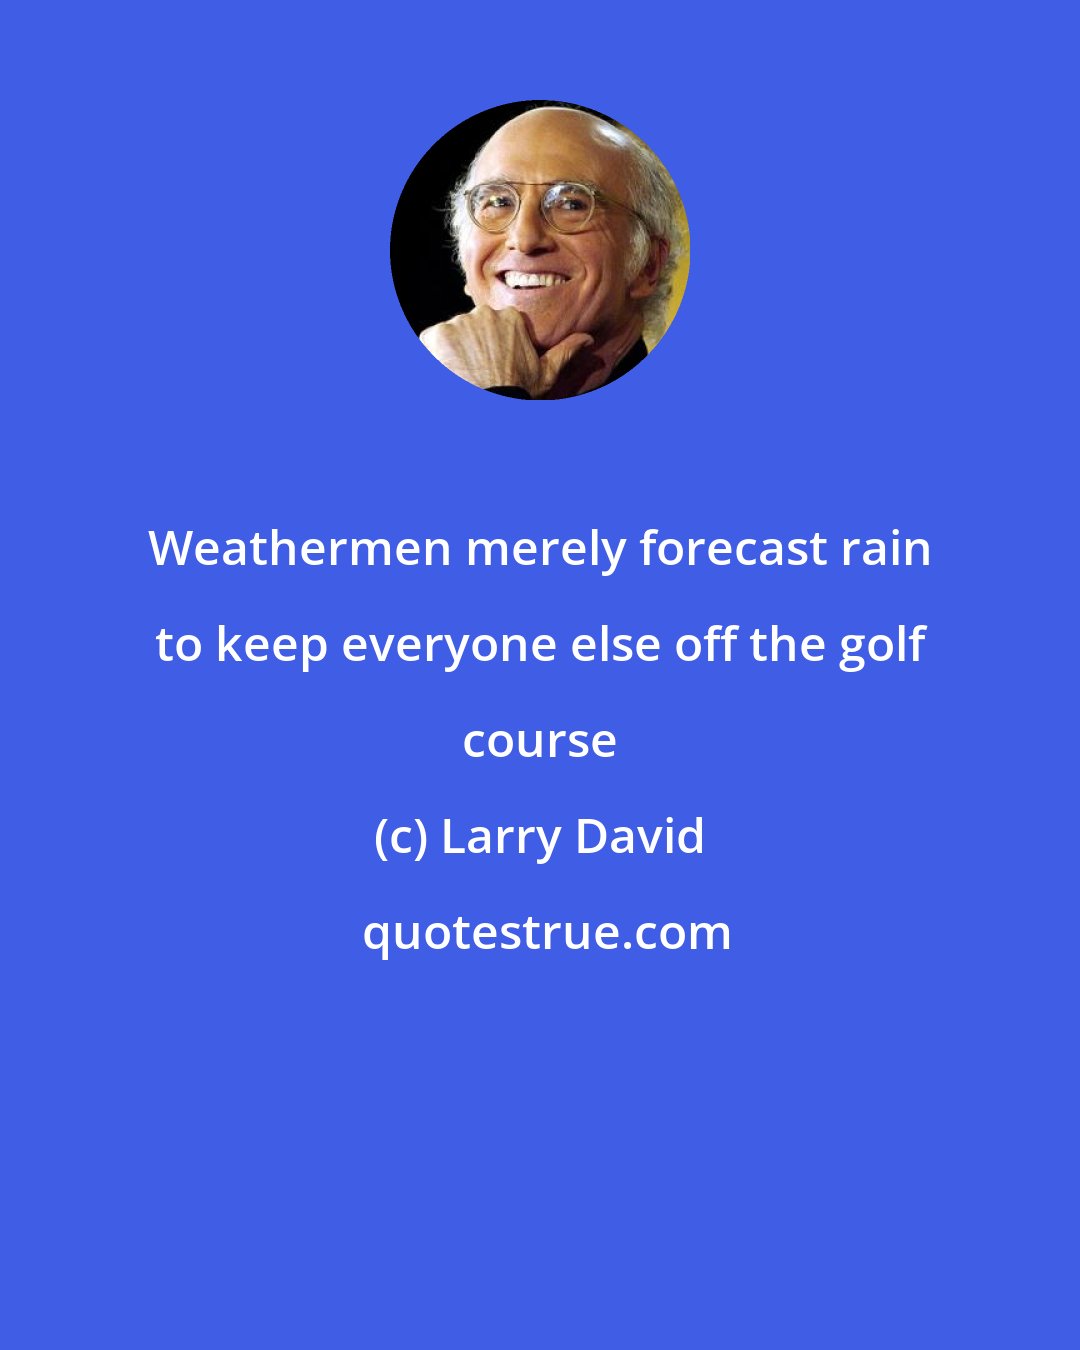 Larry David: Weathermen merely forecast rain to keep everyone else off the golf course